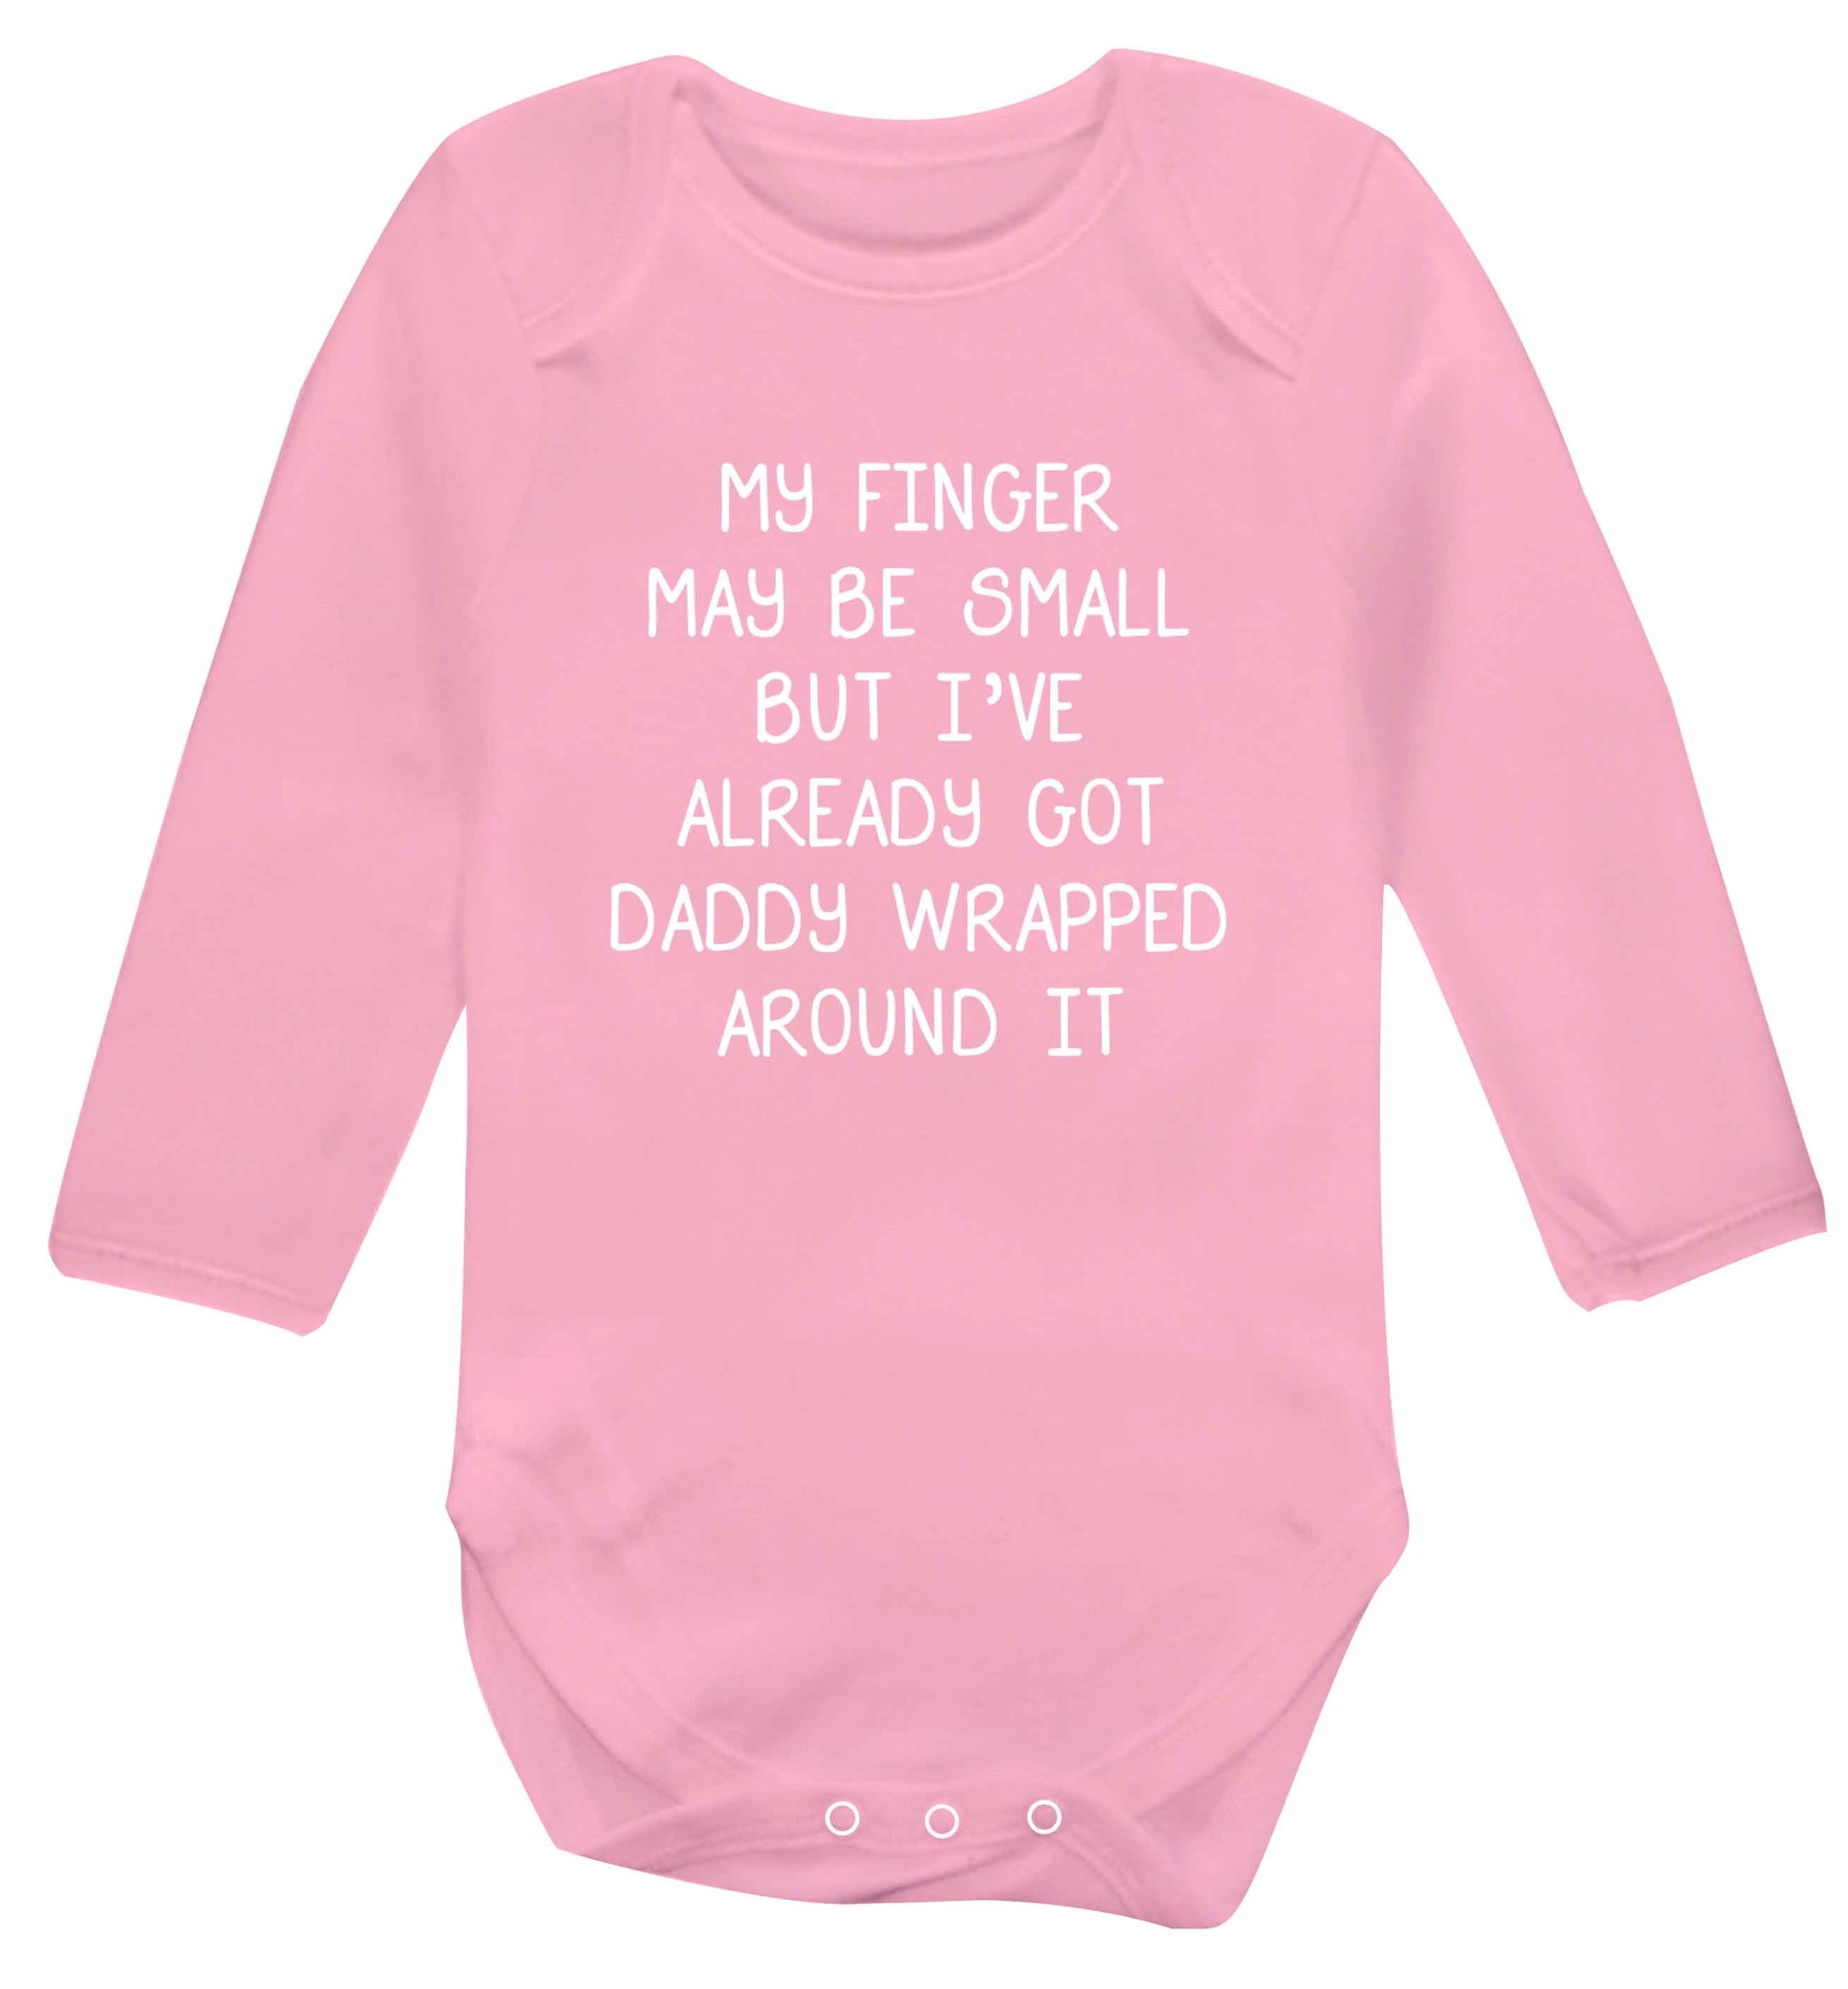 My finger may be small but I've already got daddy wrapped around it baby vest long sleeved pale pink 6-12 months